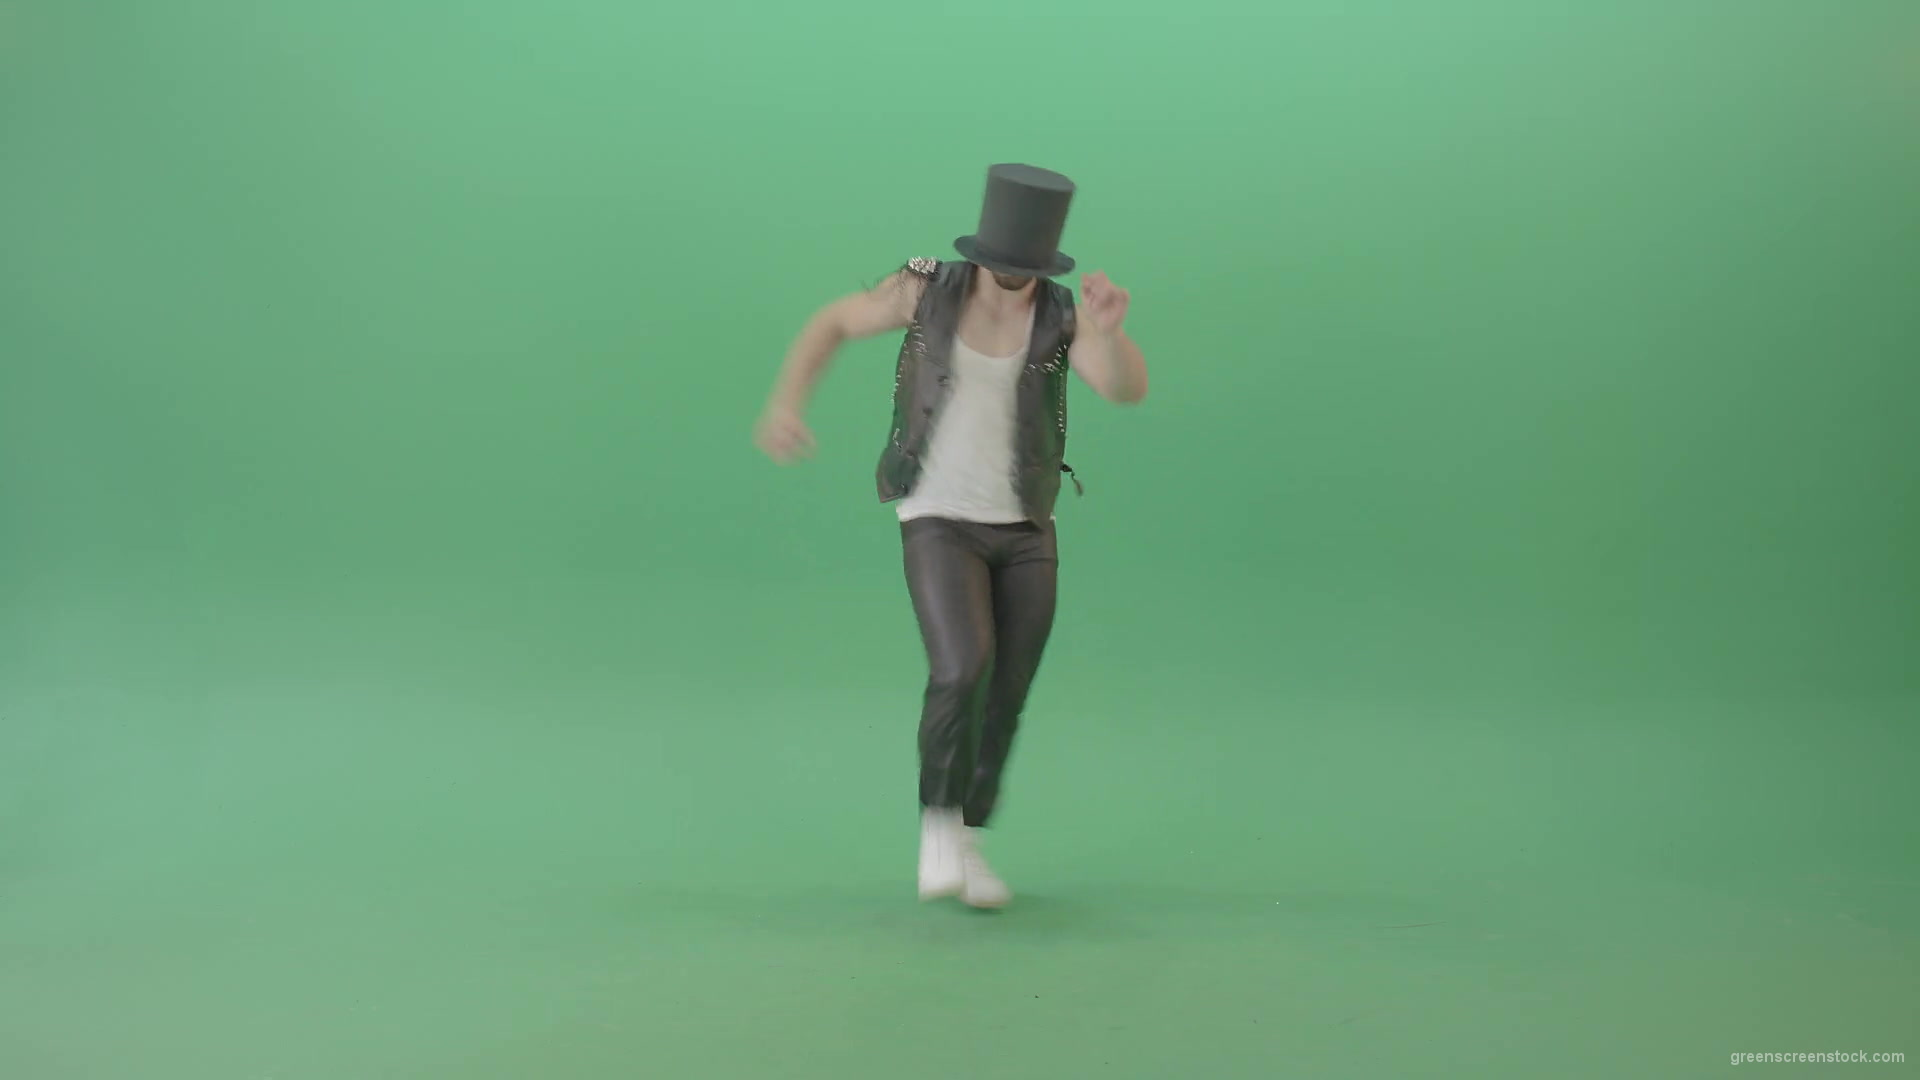 Funny-Man-in-Cylinder-Hat-and-black-fetish-costume-dancing-and-jumping-over-Green-Screen-4K-Video-Footage-1920_005 Green Screen Stock